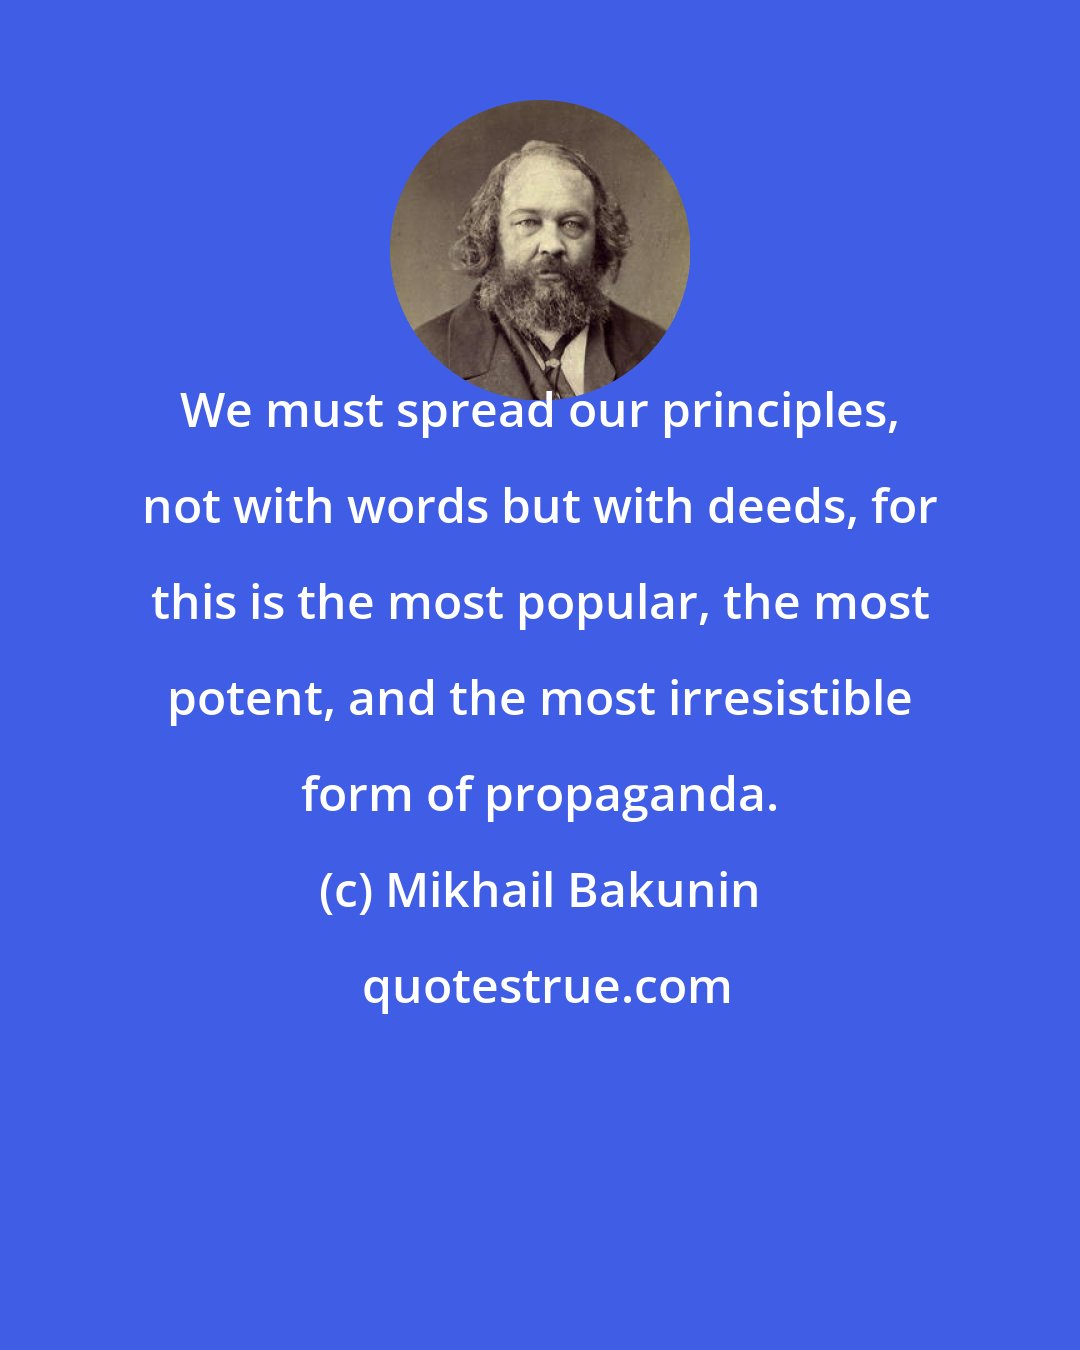 Mikhail Bakunin: We must spread our principles, not with words but with deeds, for this is the most popular, the most potent, and the most irresistible form of propaganda.